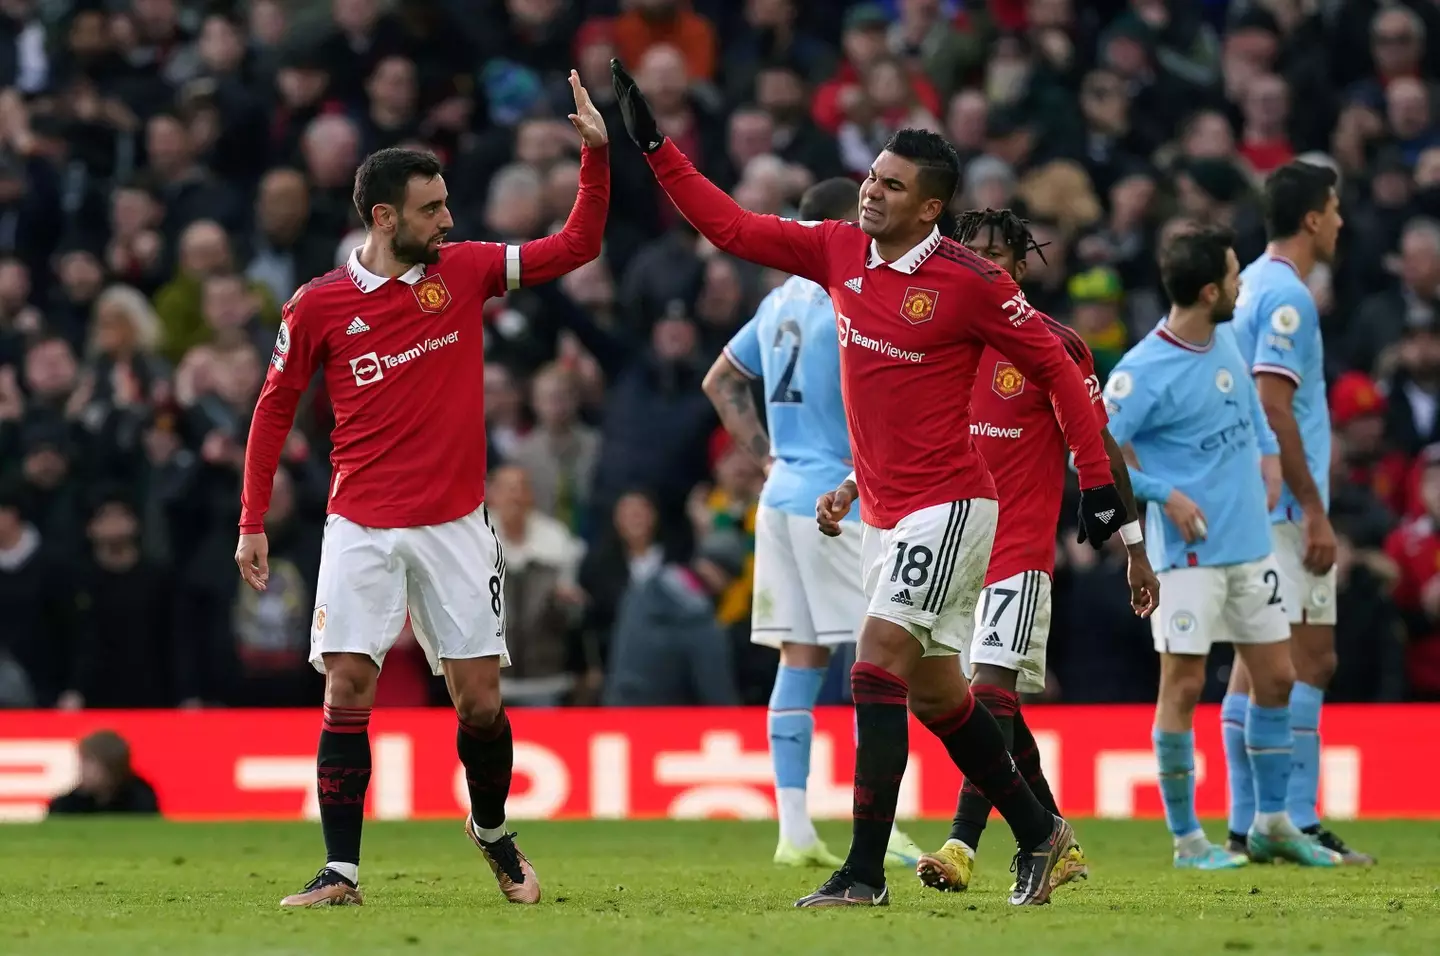 Bruno Fernandes and Casemiro celebrate a goal for Manchester United. Image: Alamy 